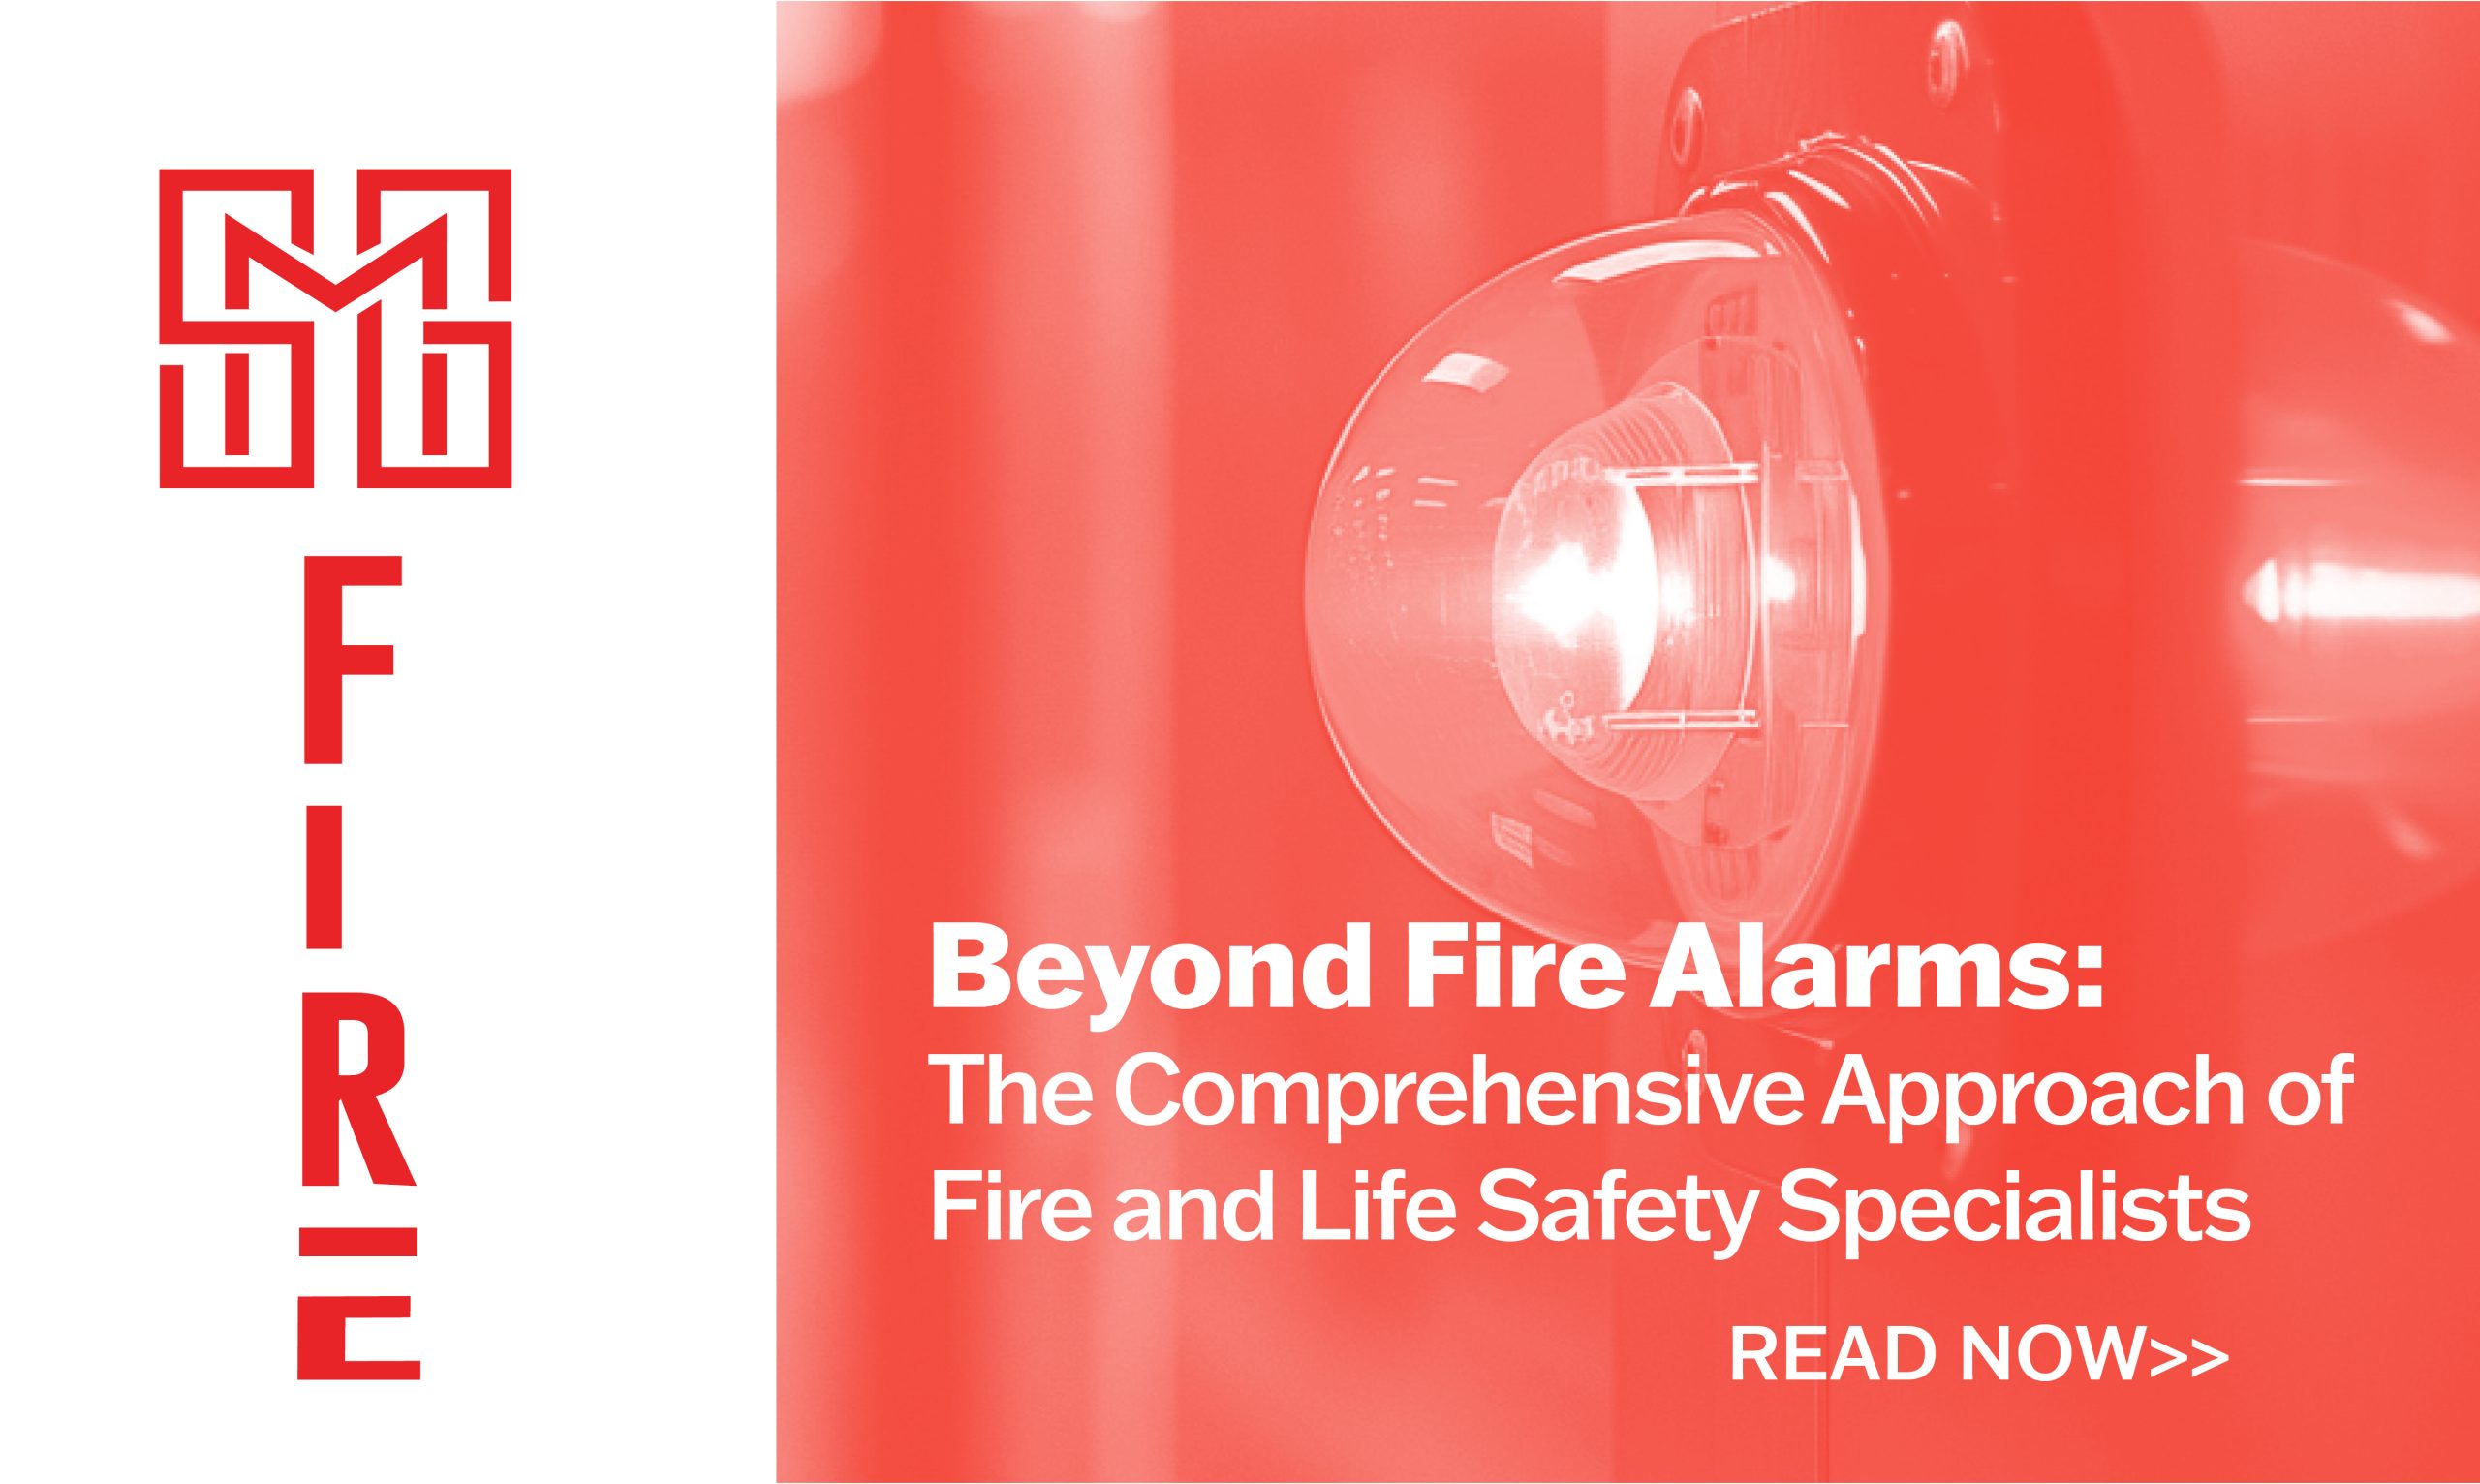 Comprehensive fire and life safety